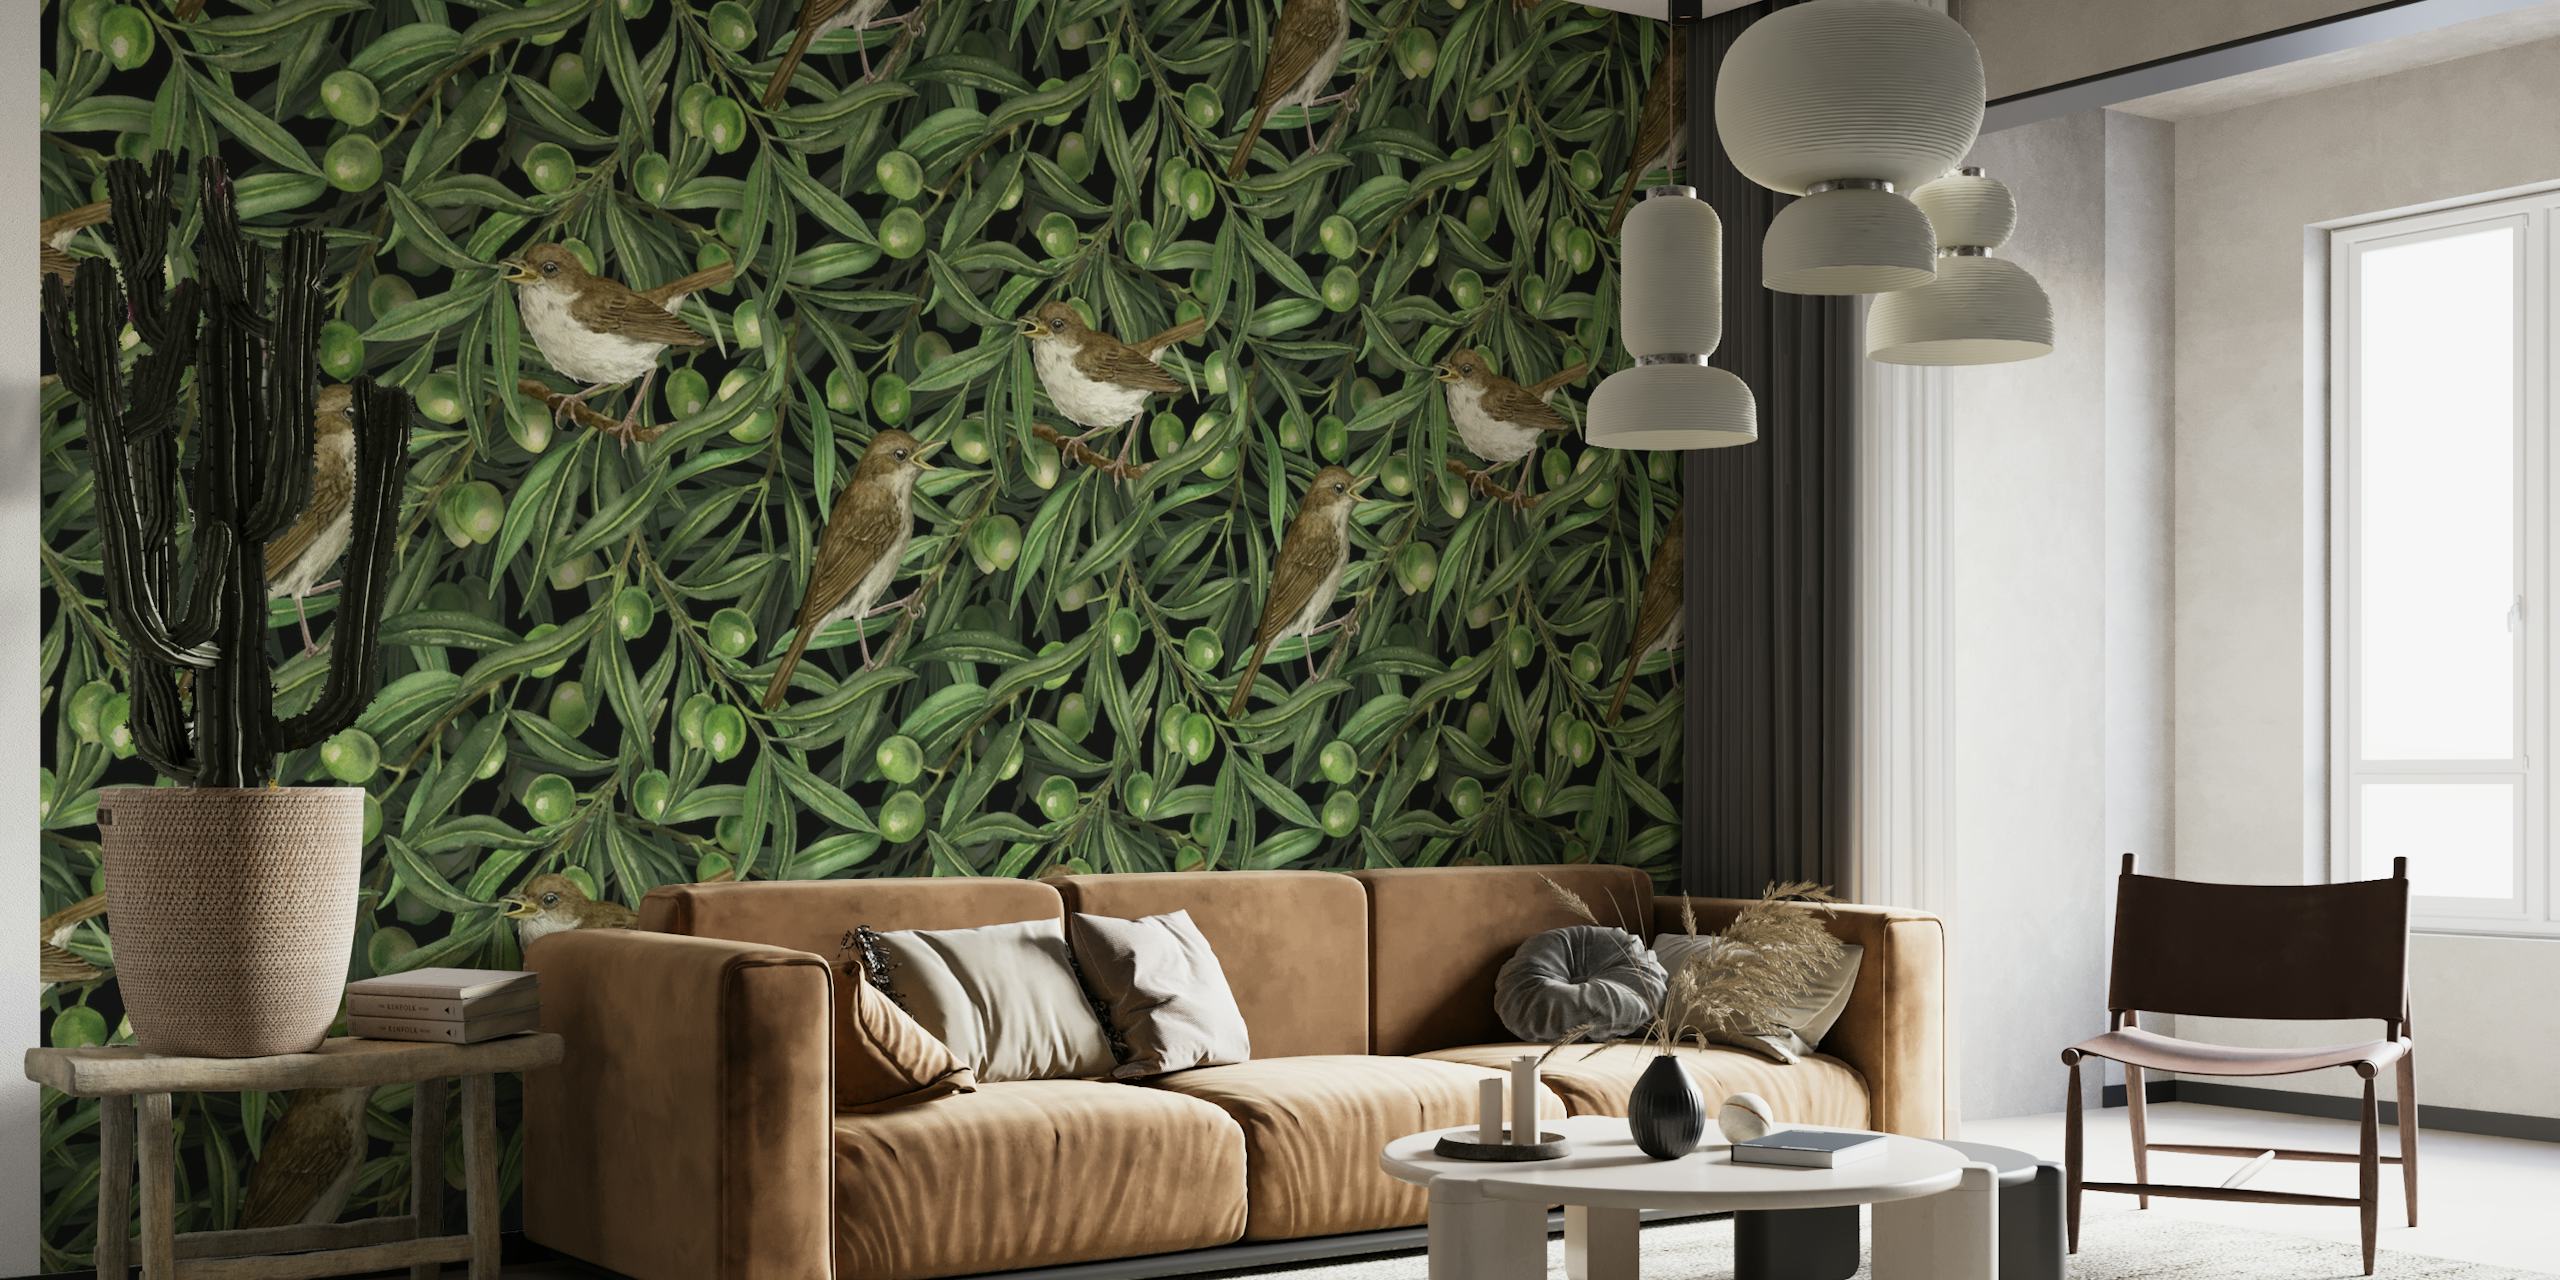 Nightingales in the olive tree wallpaper